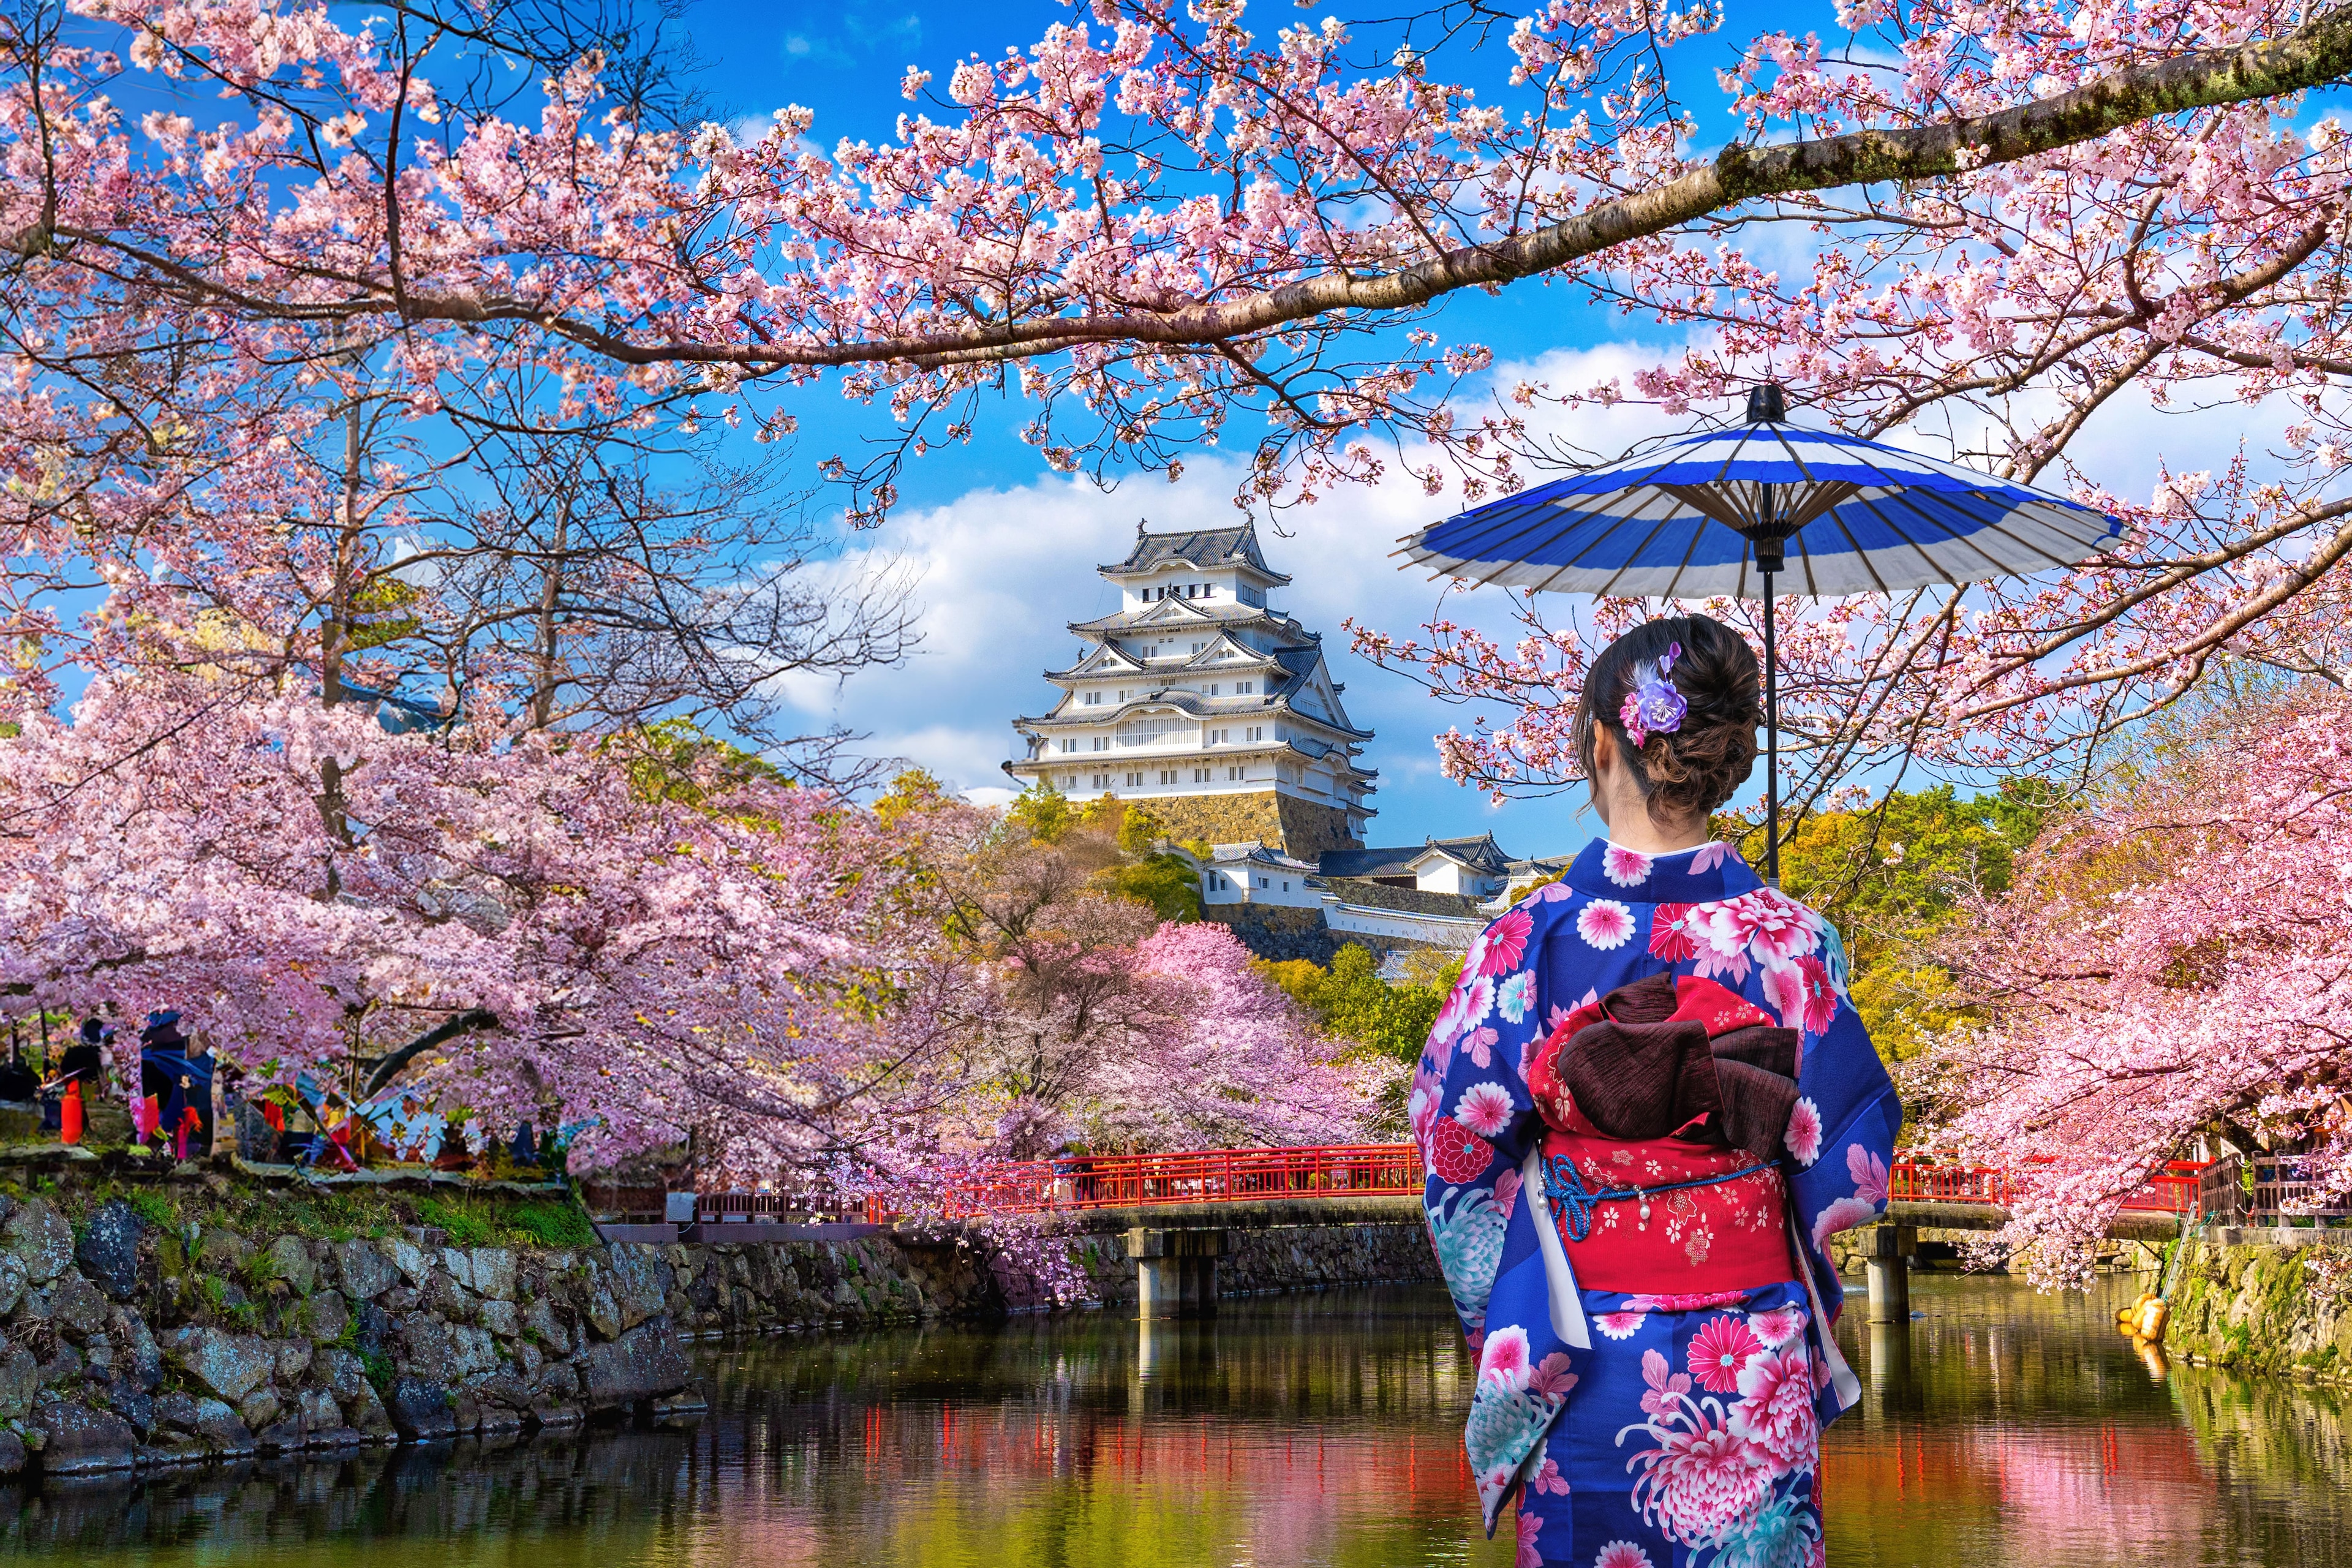 Japan: What next after the Cherry Blossoms?